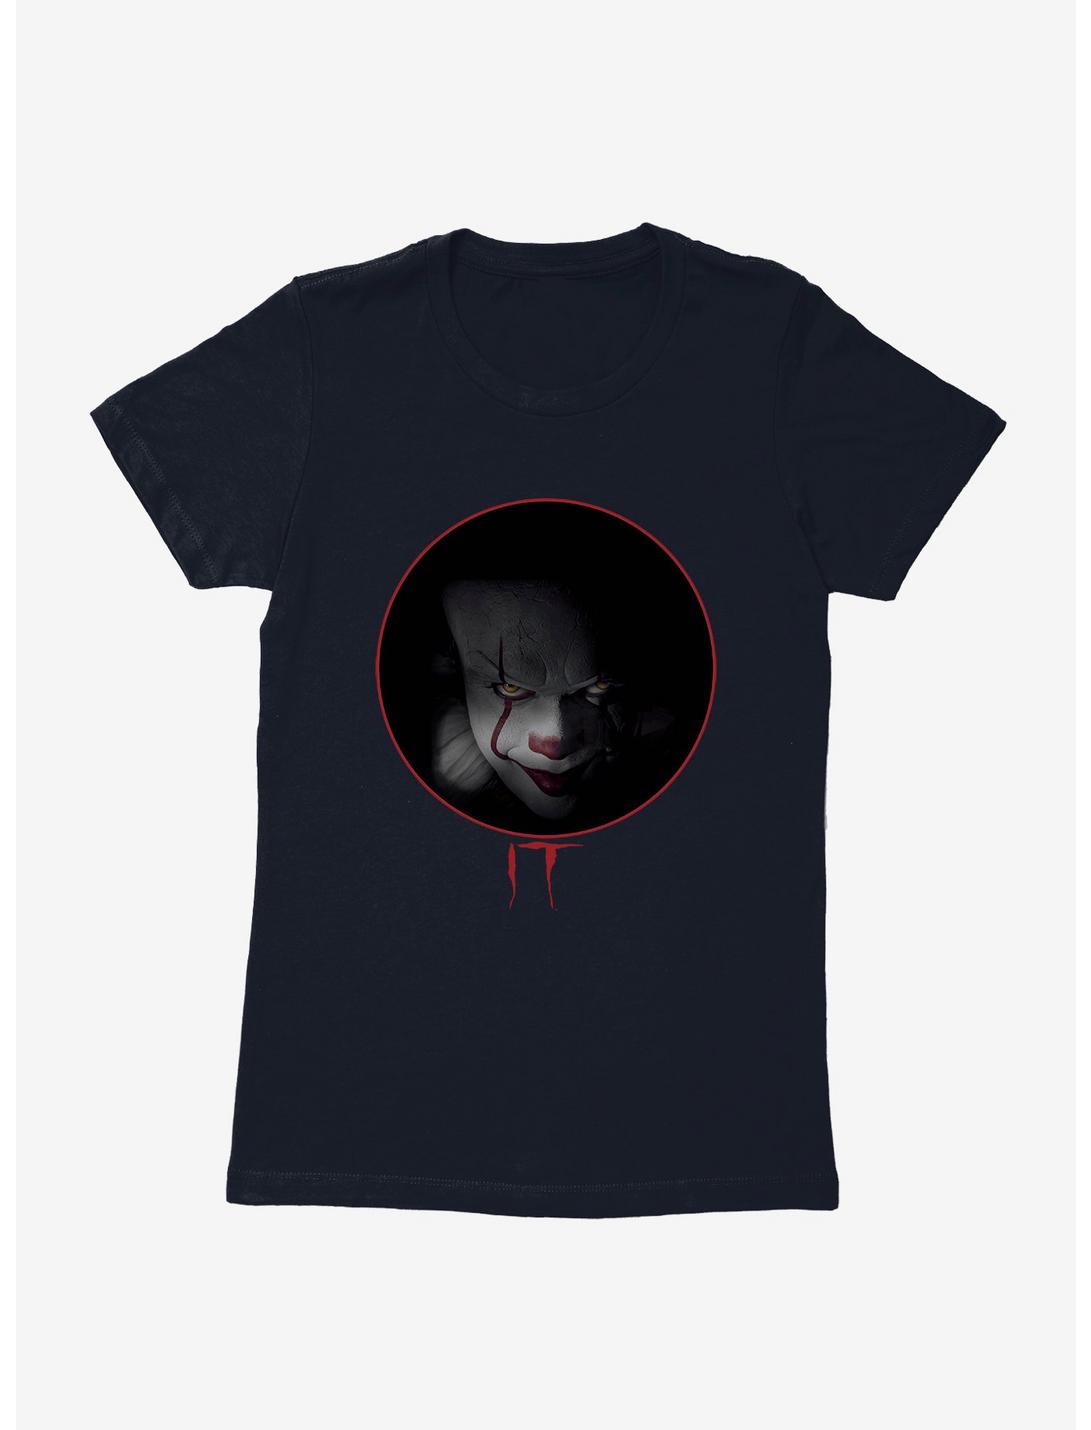 IT Pennywise Evil Stare Womens T-Shirt, MIDNIGHT NAVY, hi-res